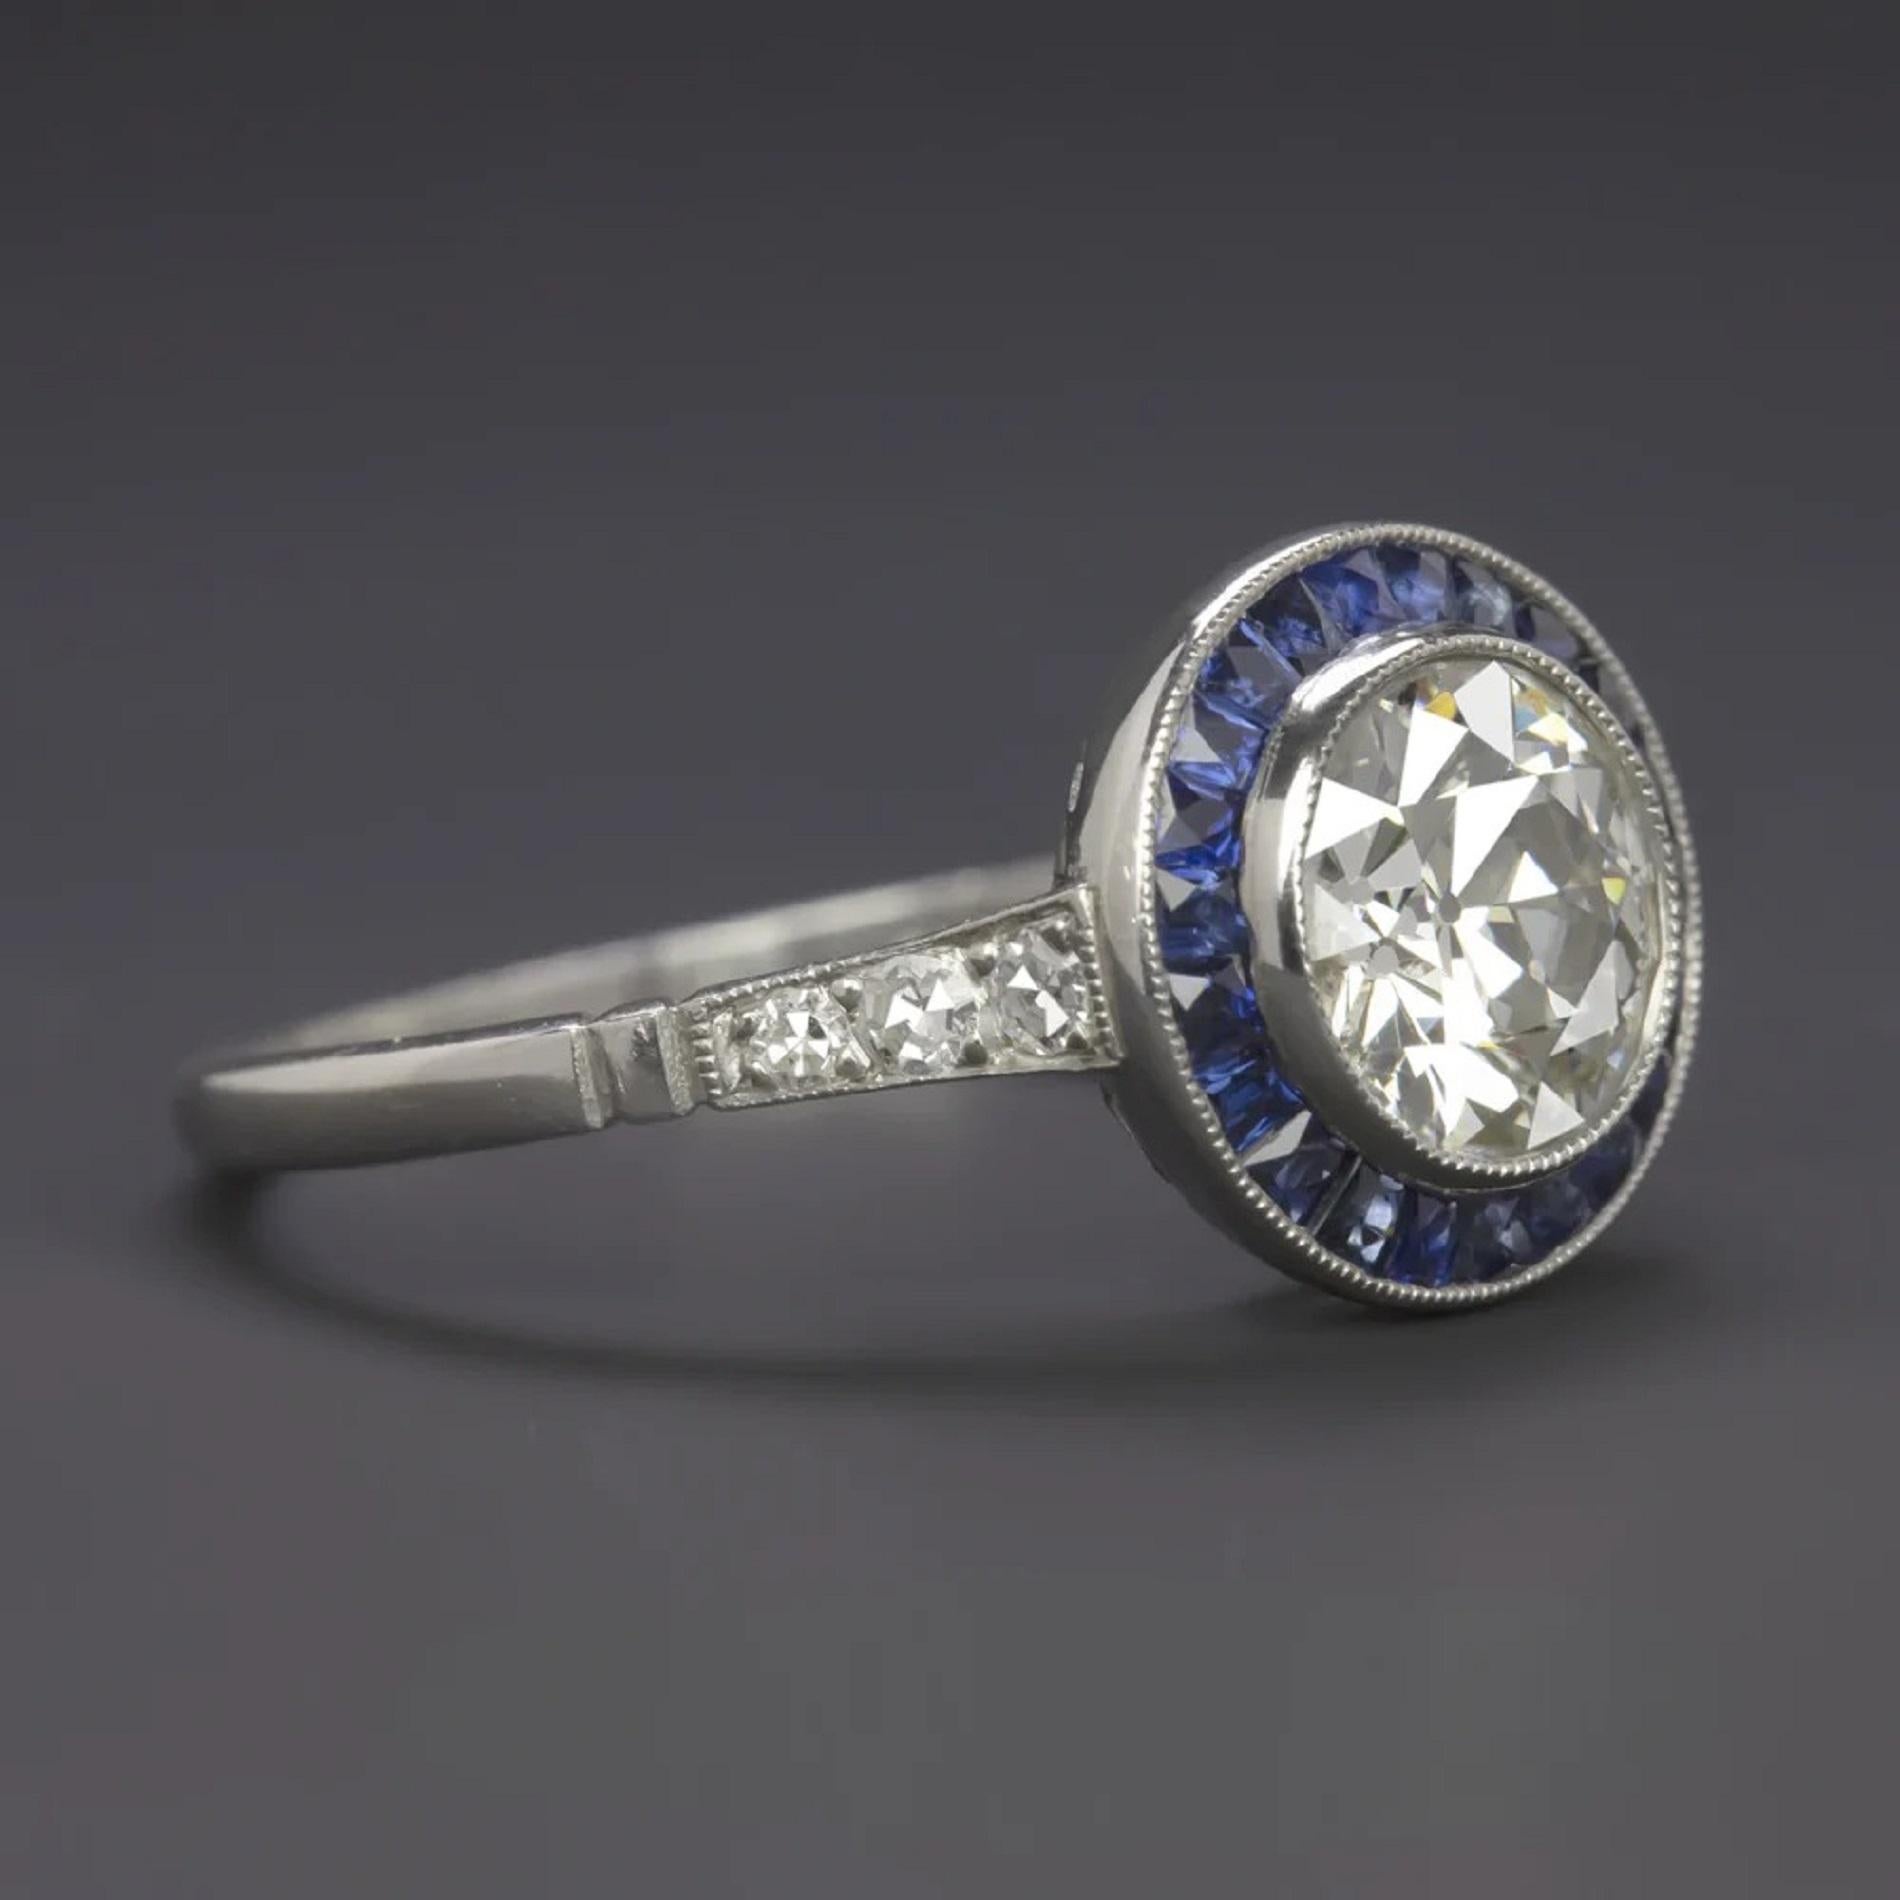 An exquisite 1.5 carat old European cut diamond surrounded by a glamorous ring of royal blue natural sapphires. Beautifully white and completely eye clean, the diamond is gorgeously vibrant. Cut by hand during the Art Deco era of the 1920s to 1930s,